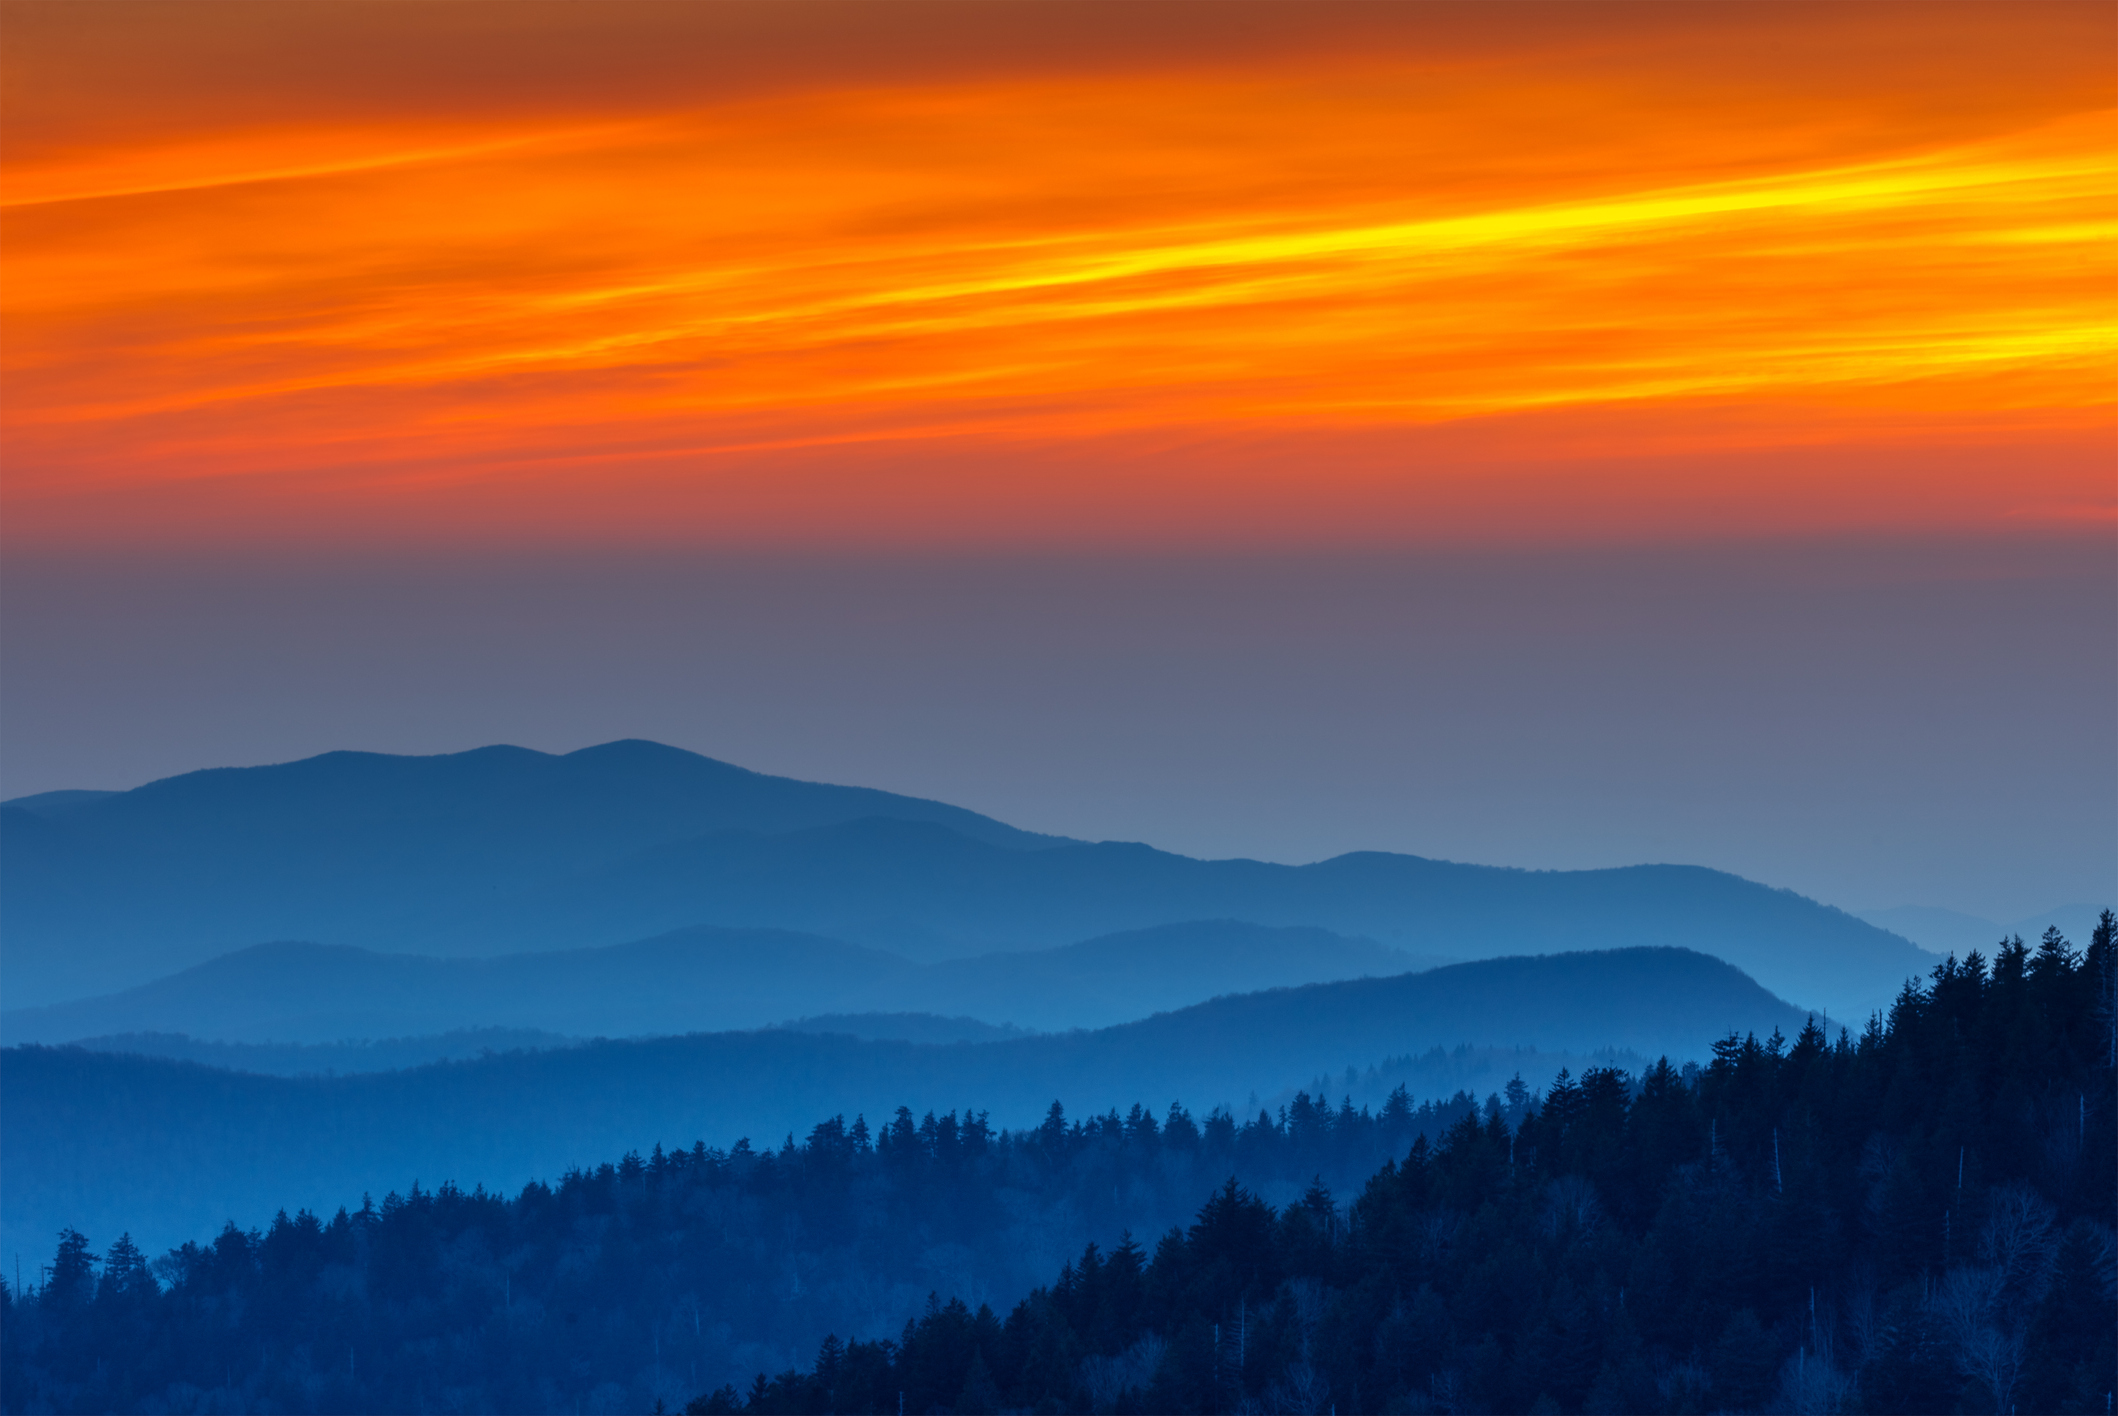 Best Views for Sunrises and Sunsets - Blount Tourism